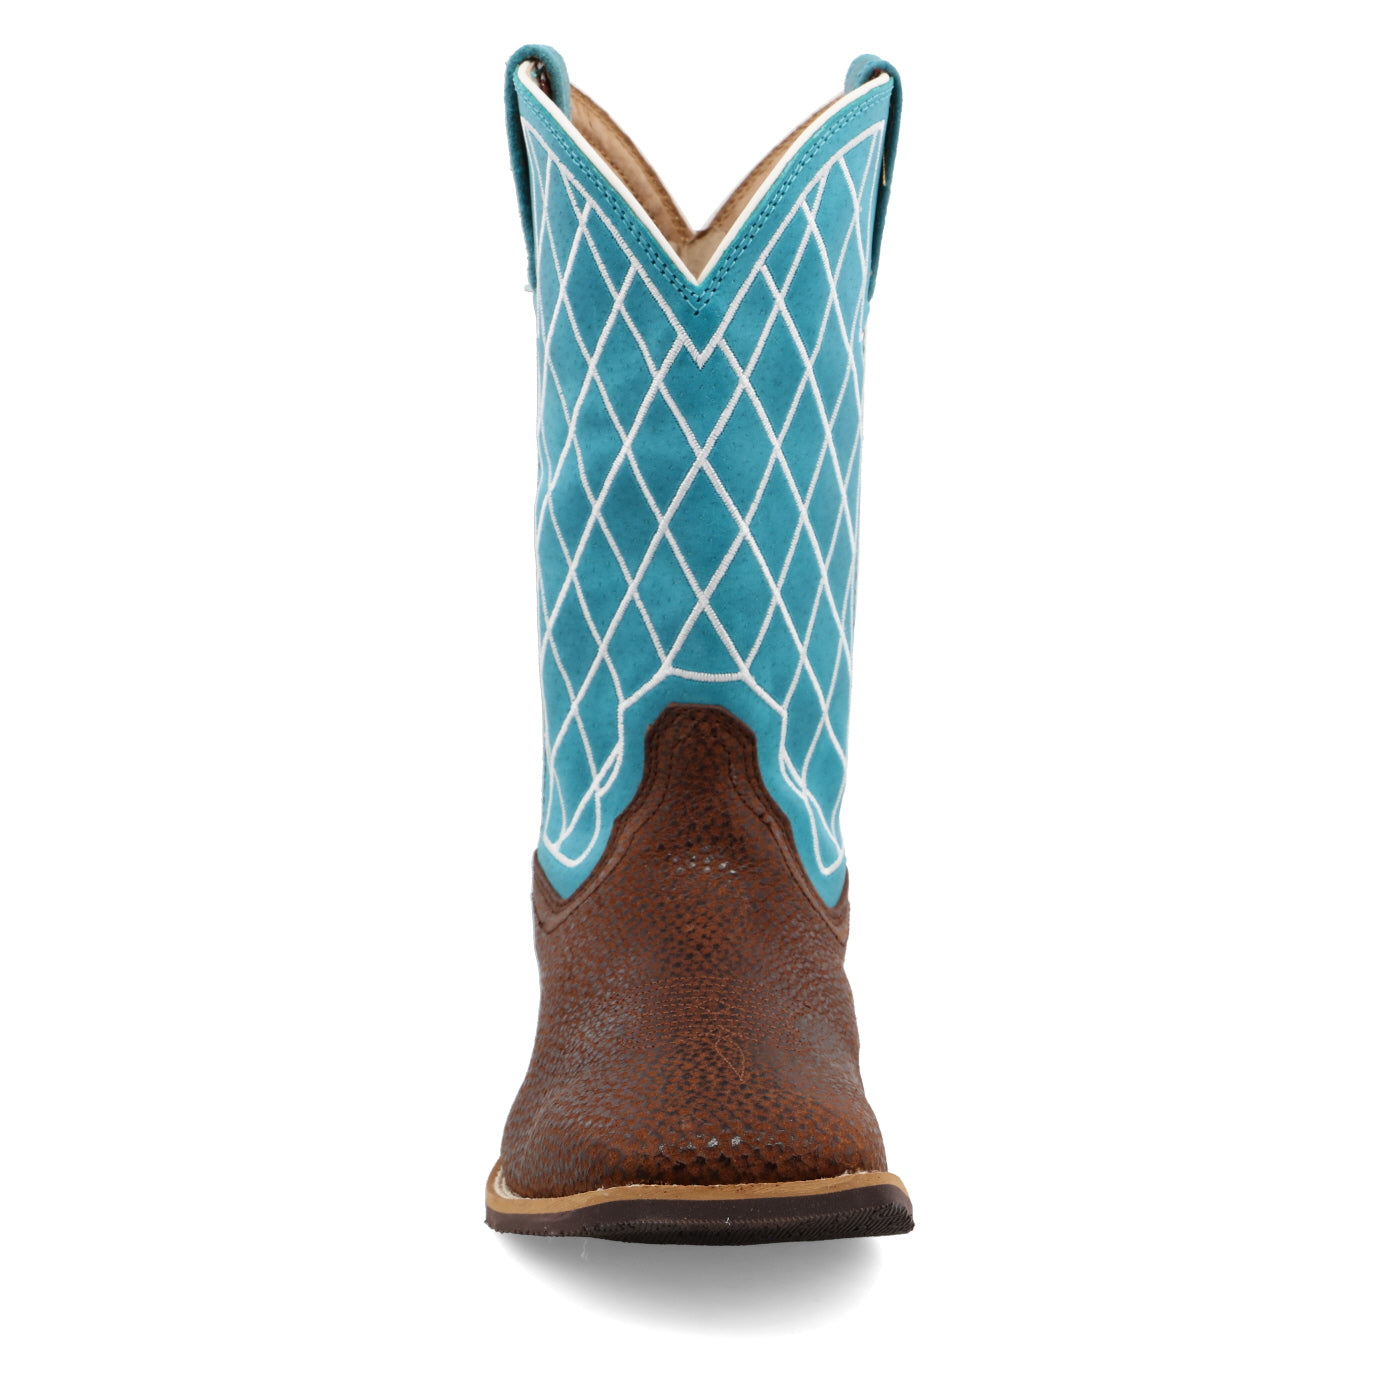 Top Hand - Distressed Saddle & Teal